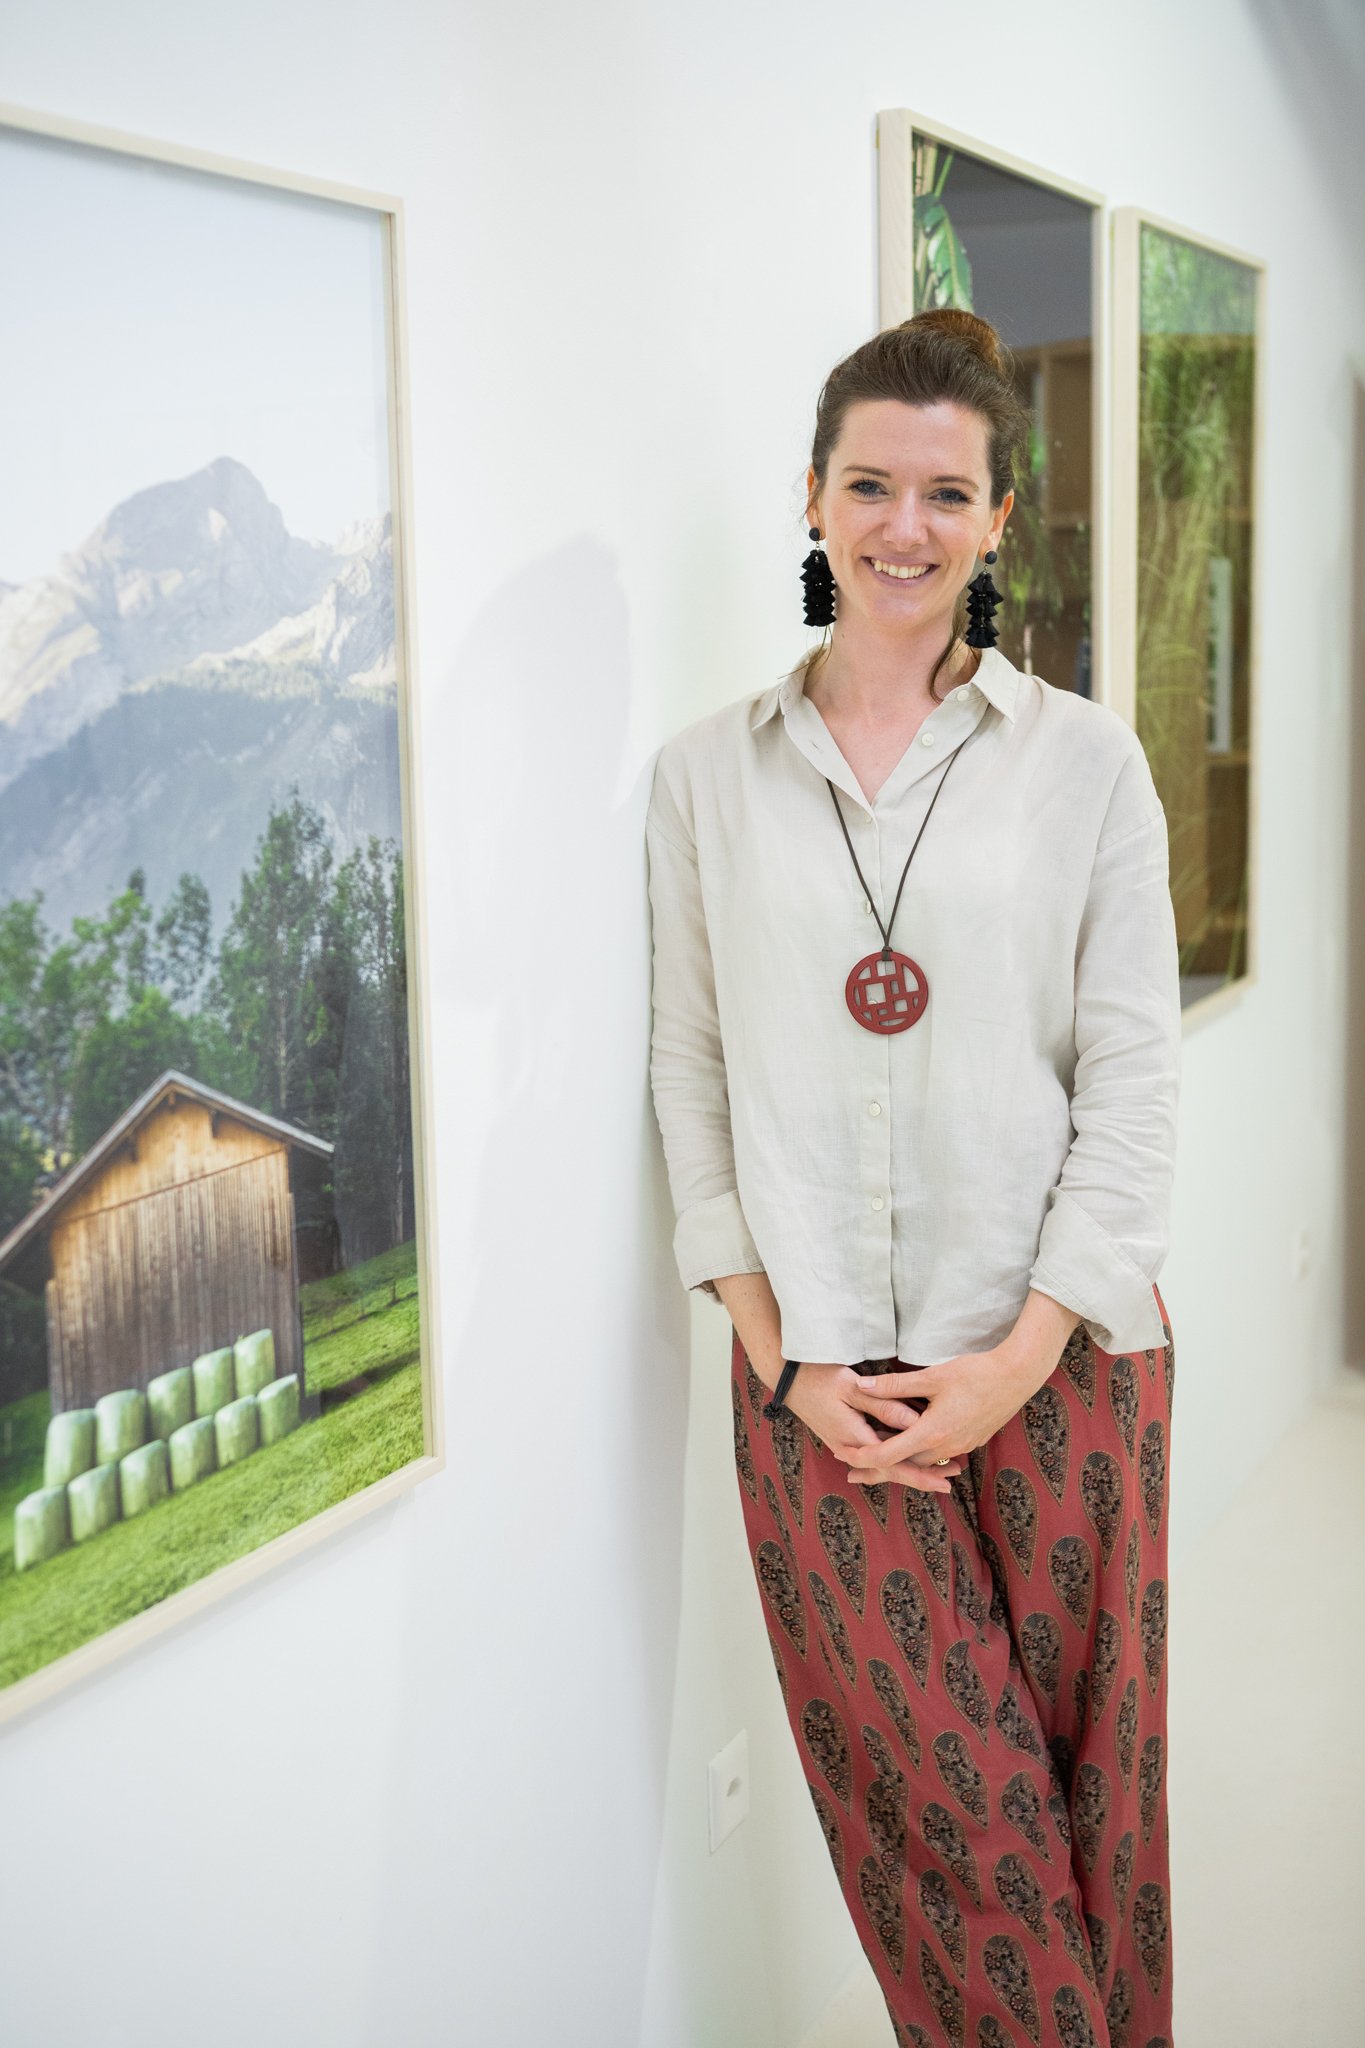  Opening for the Exhibition “In Transition” at Studio Naegeli, Gstaad. August 28th - September 30st    Photo by Chantal Reichenbach  